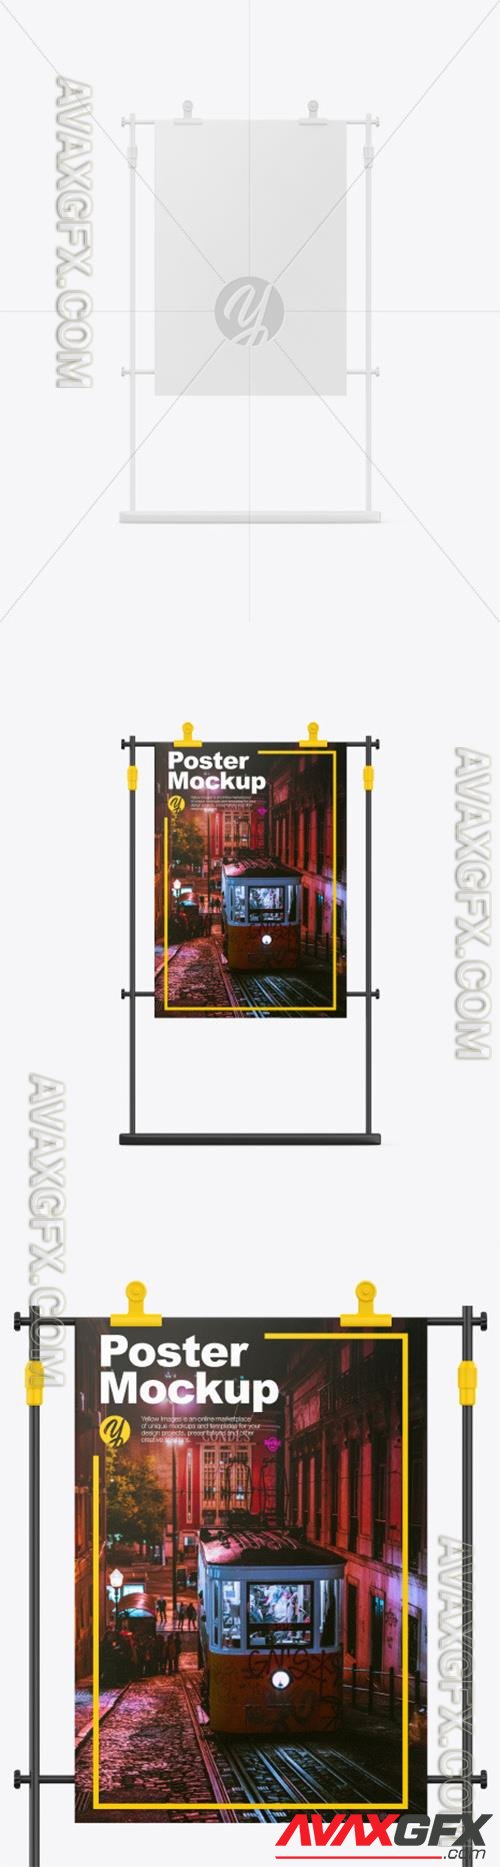 Stand with Poster Mockup 89598 TIF